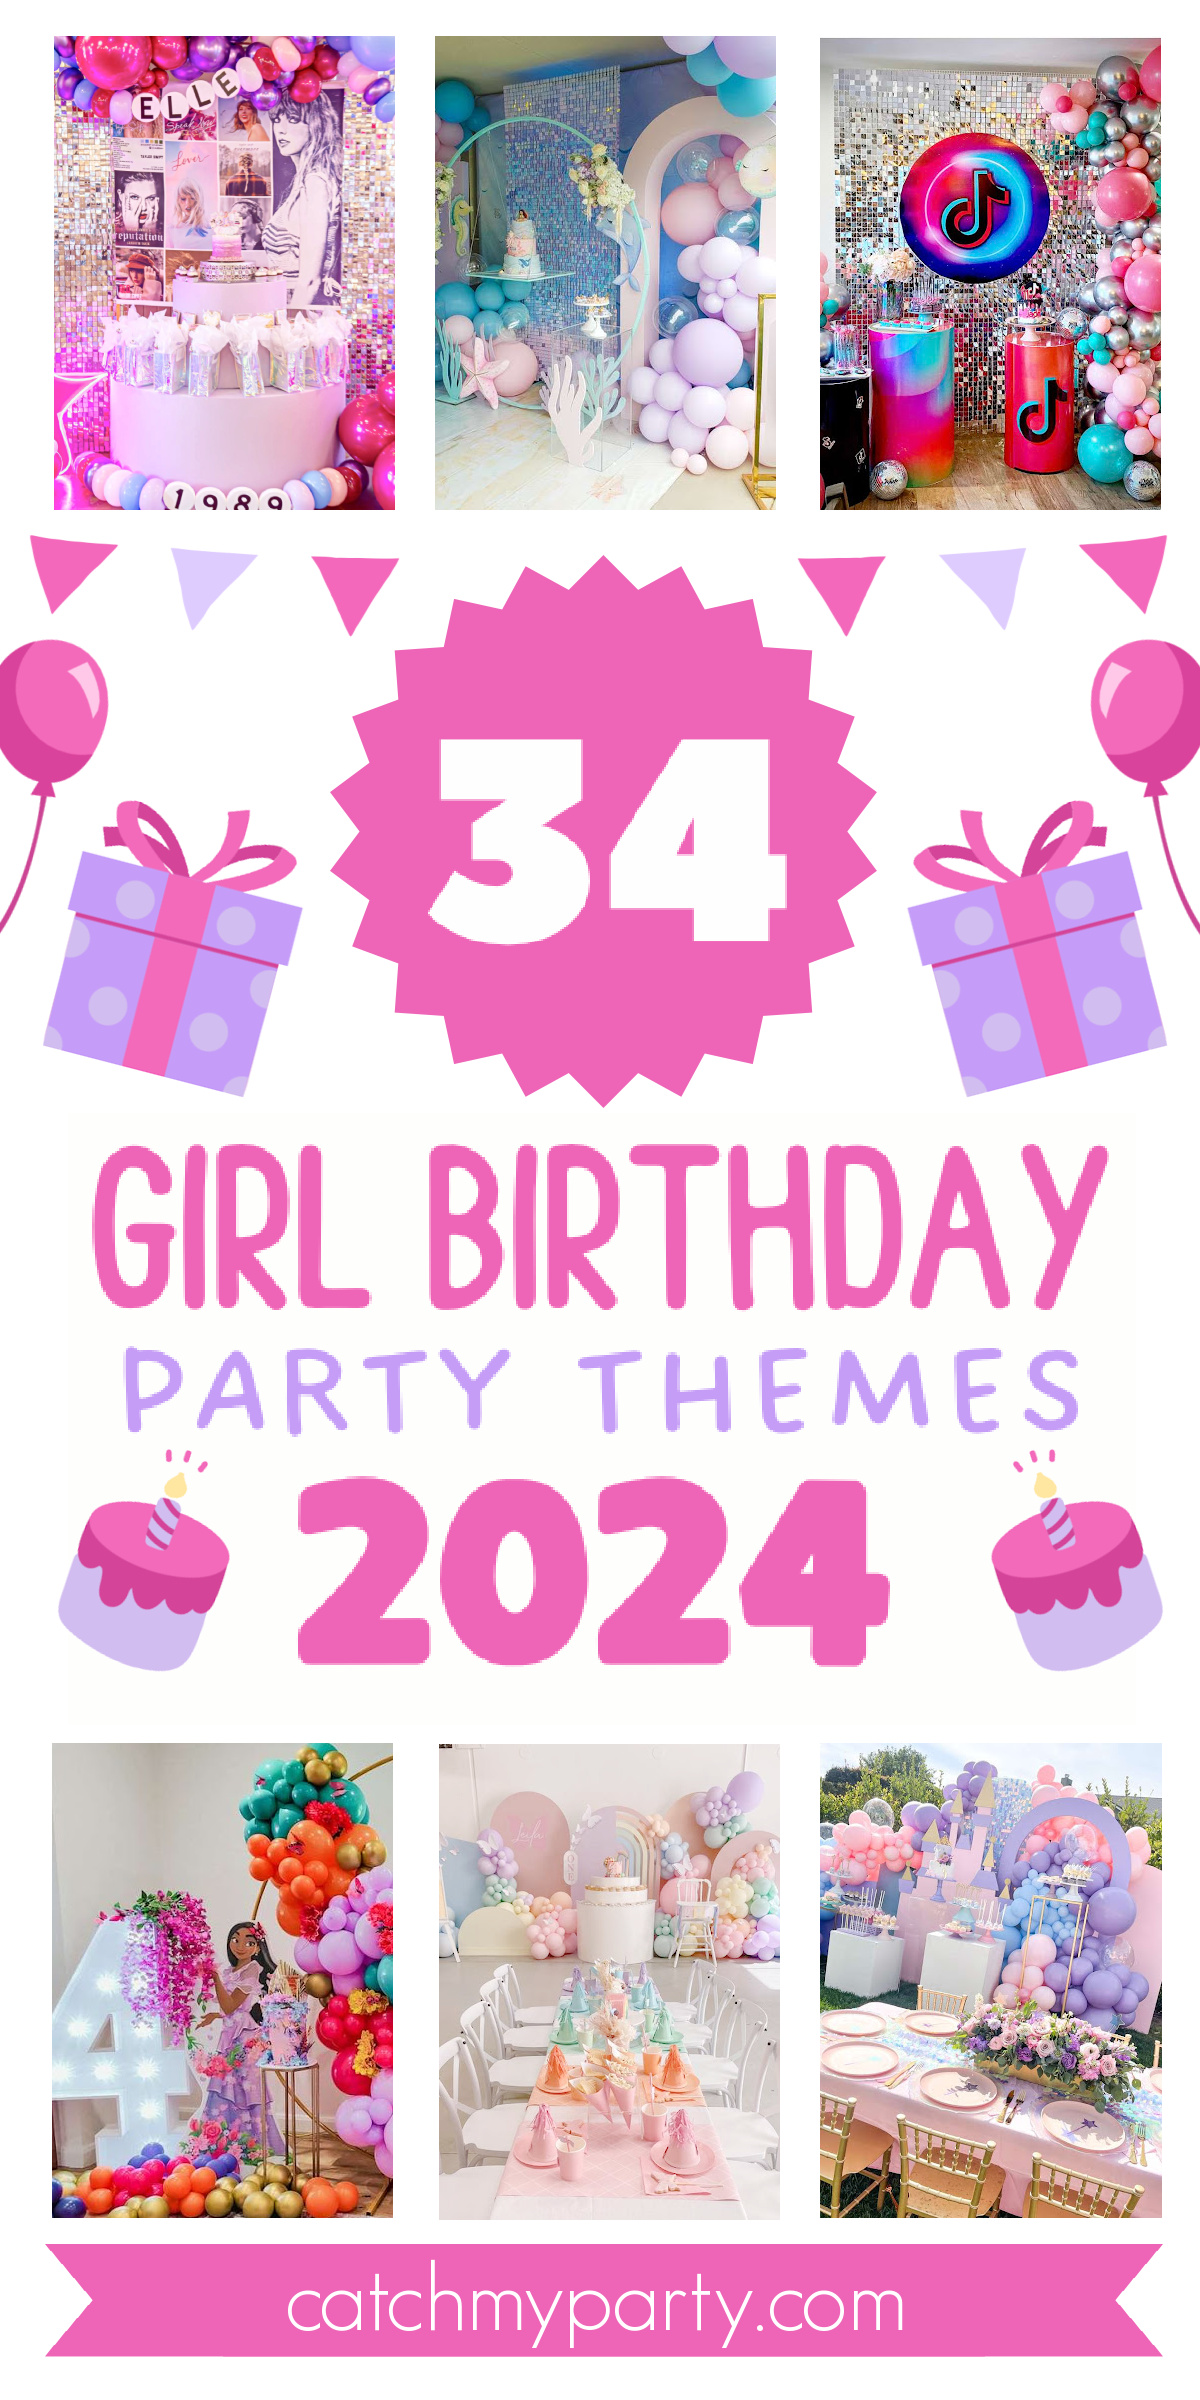 These Are the Most Popular Girl Birthday Party Themes for 2024!